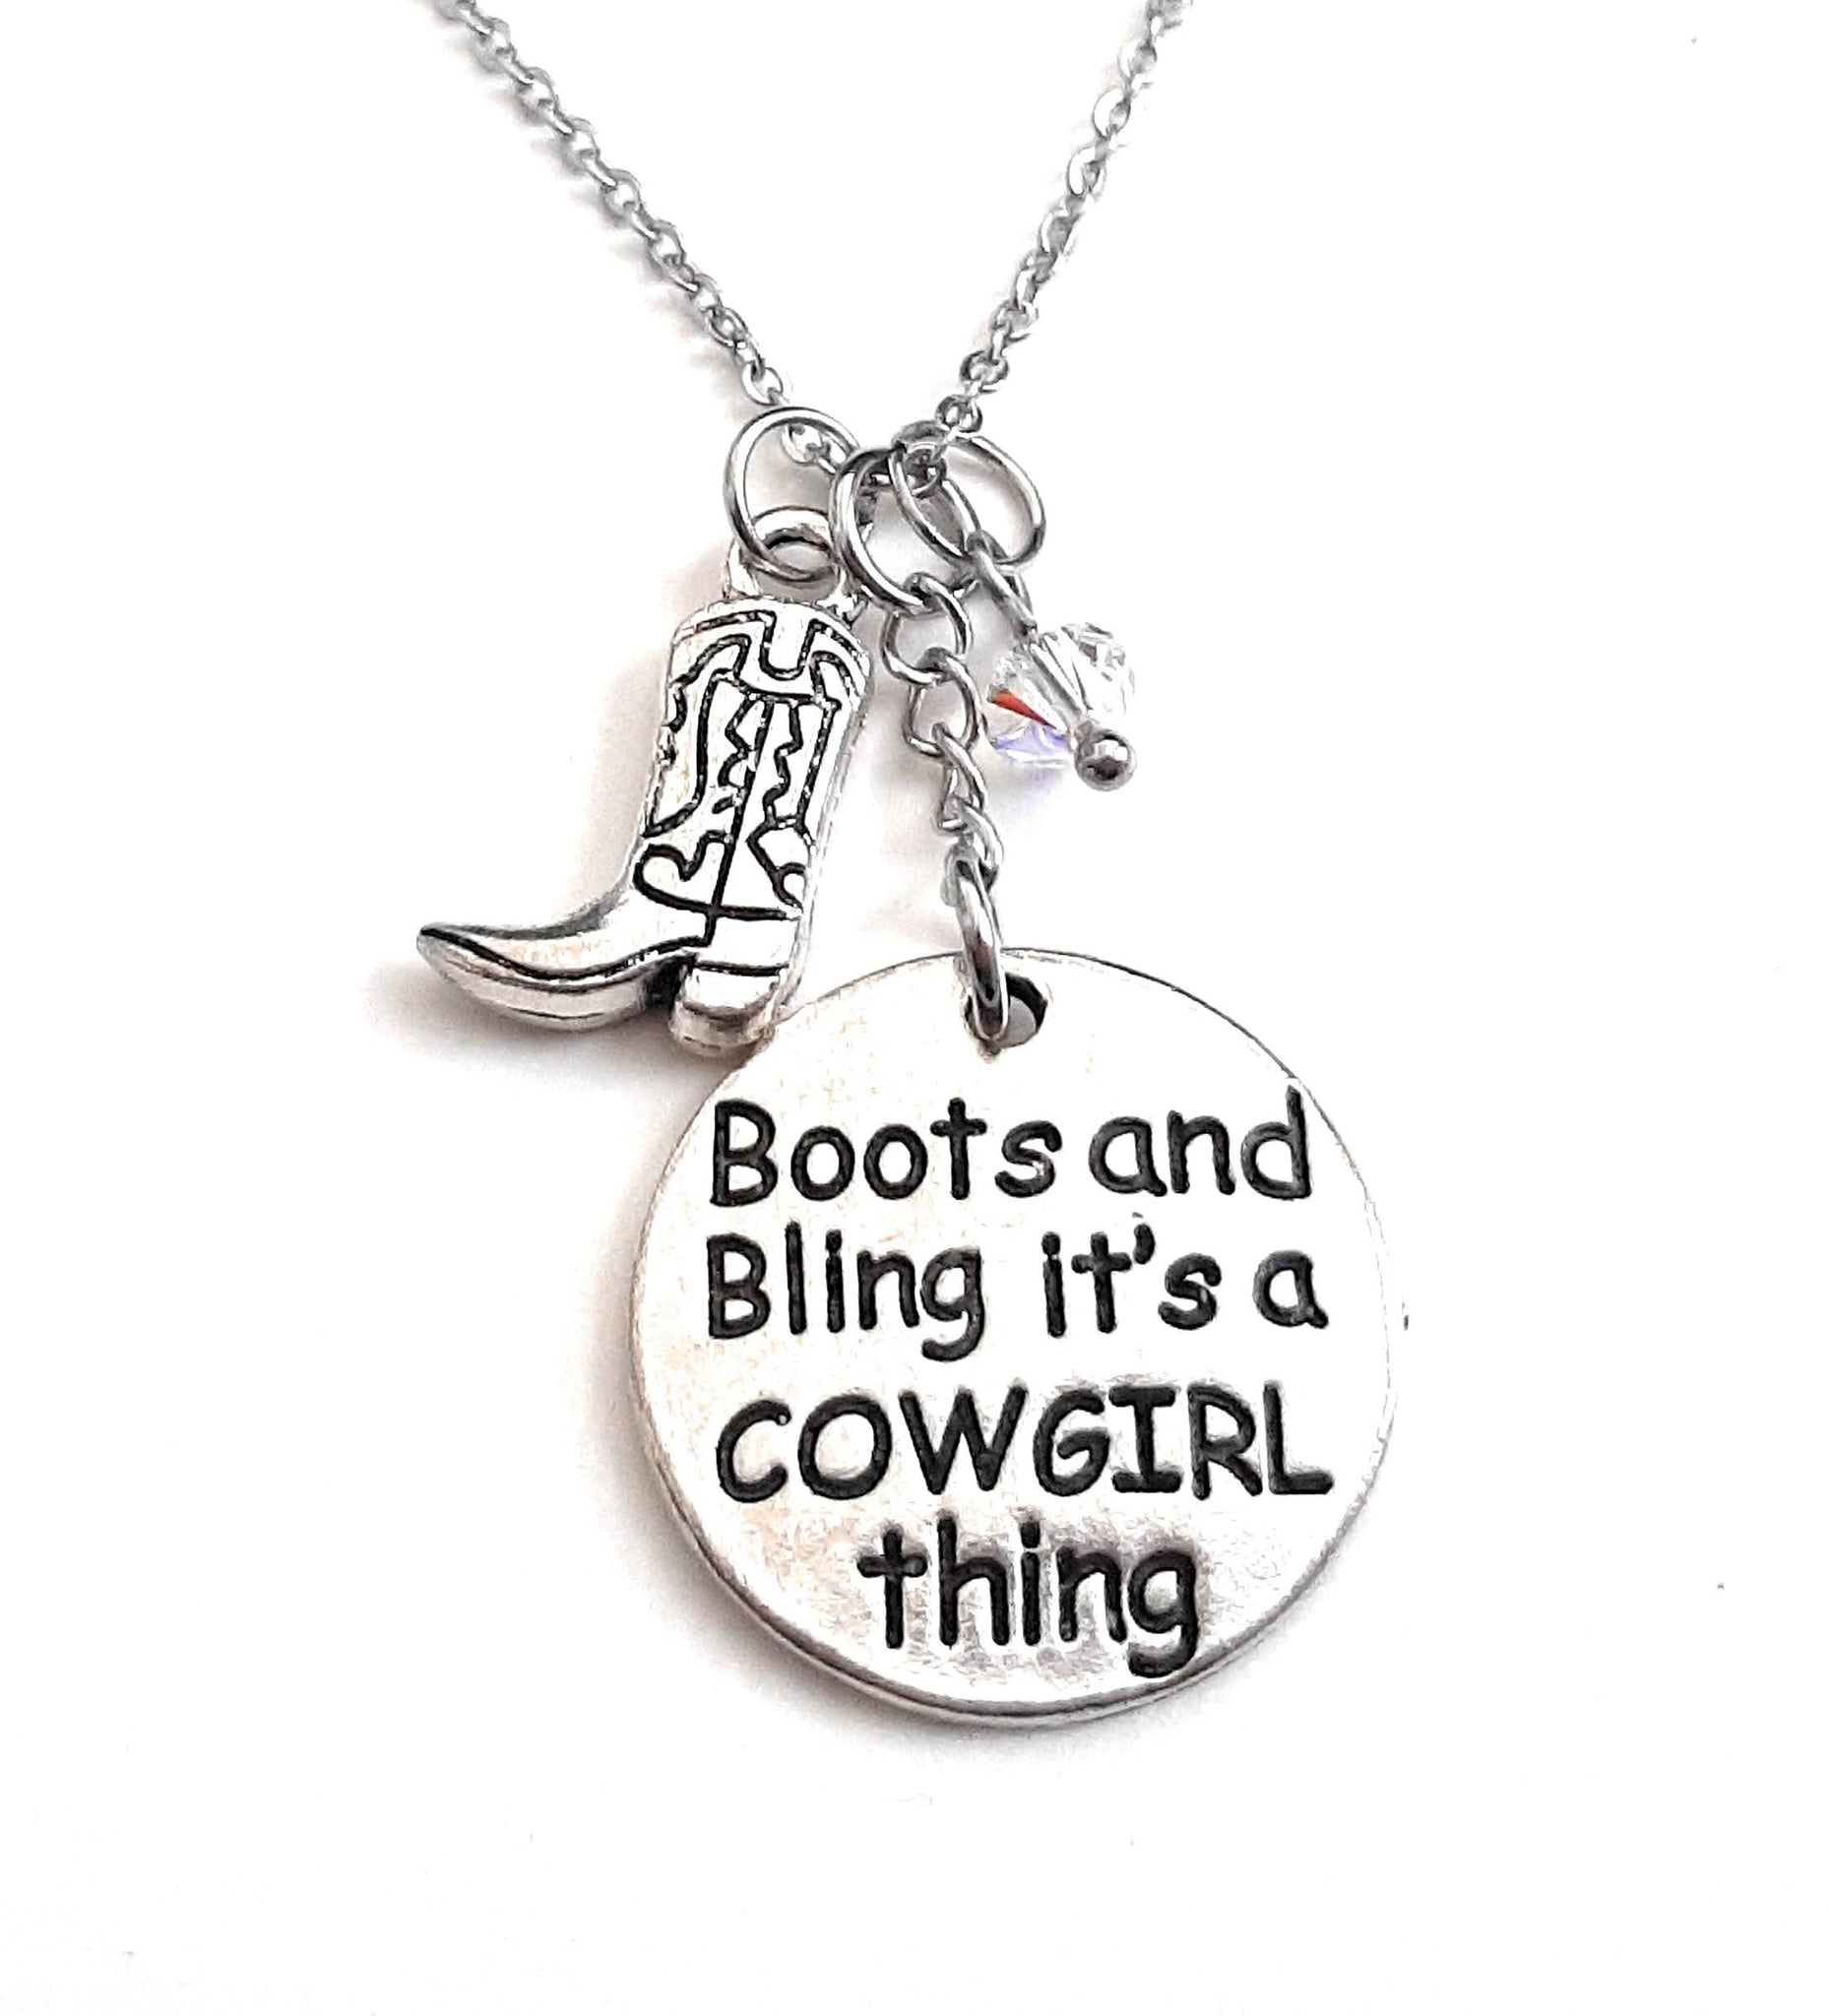 Message Pendant Necklace "Boots & Bling its a COWGIRL Thing" Your Choice of Charm and Birthstone Color